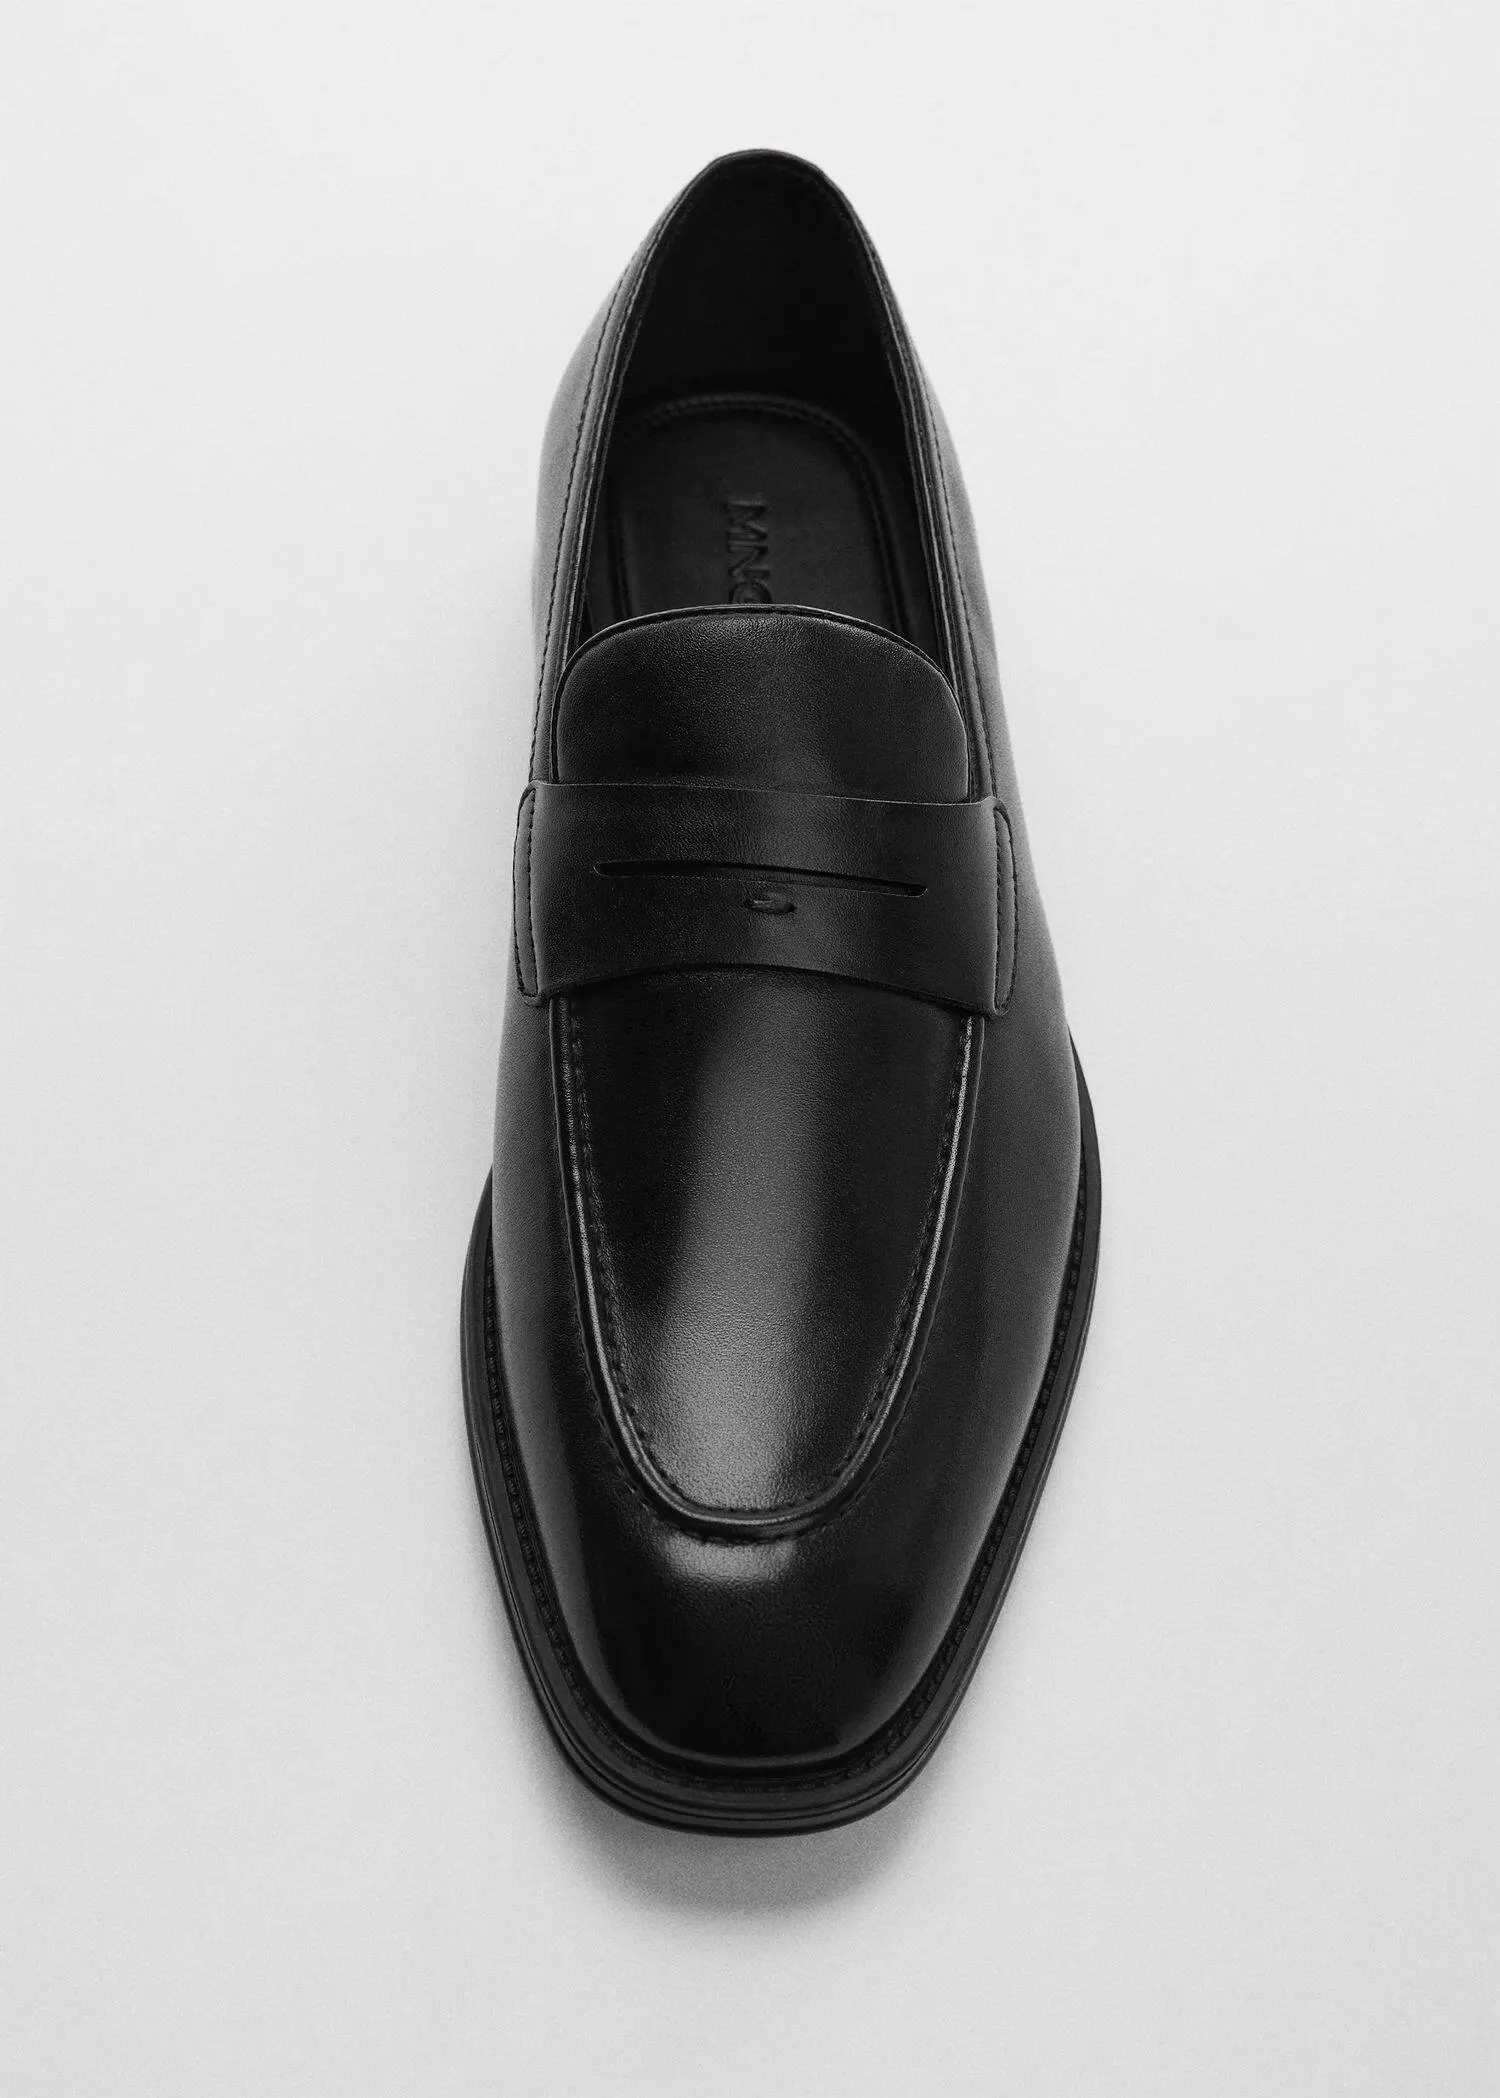 Mango Aged-leather loafers. a pair of black loafers on top of a white surface. 